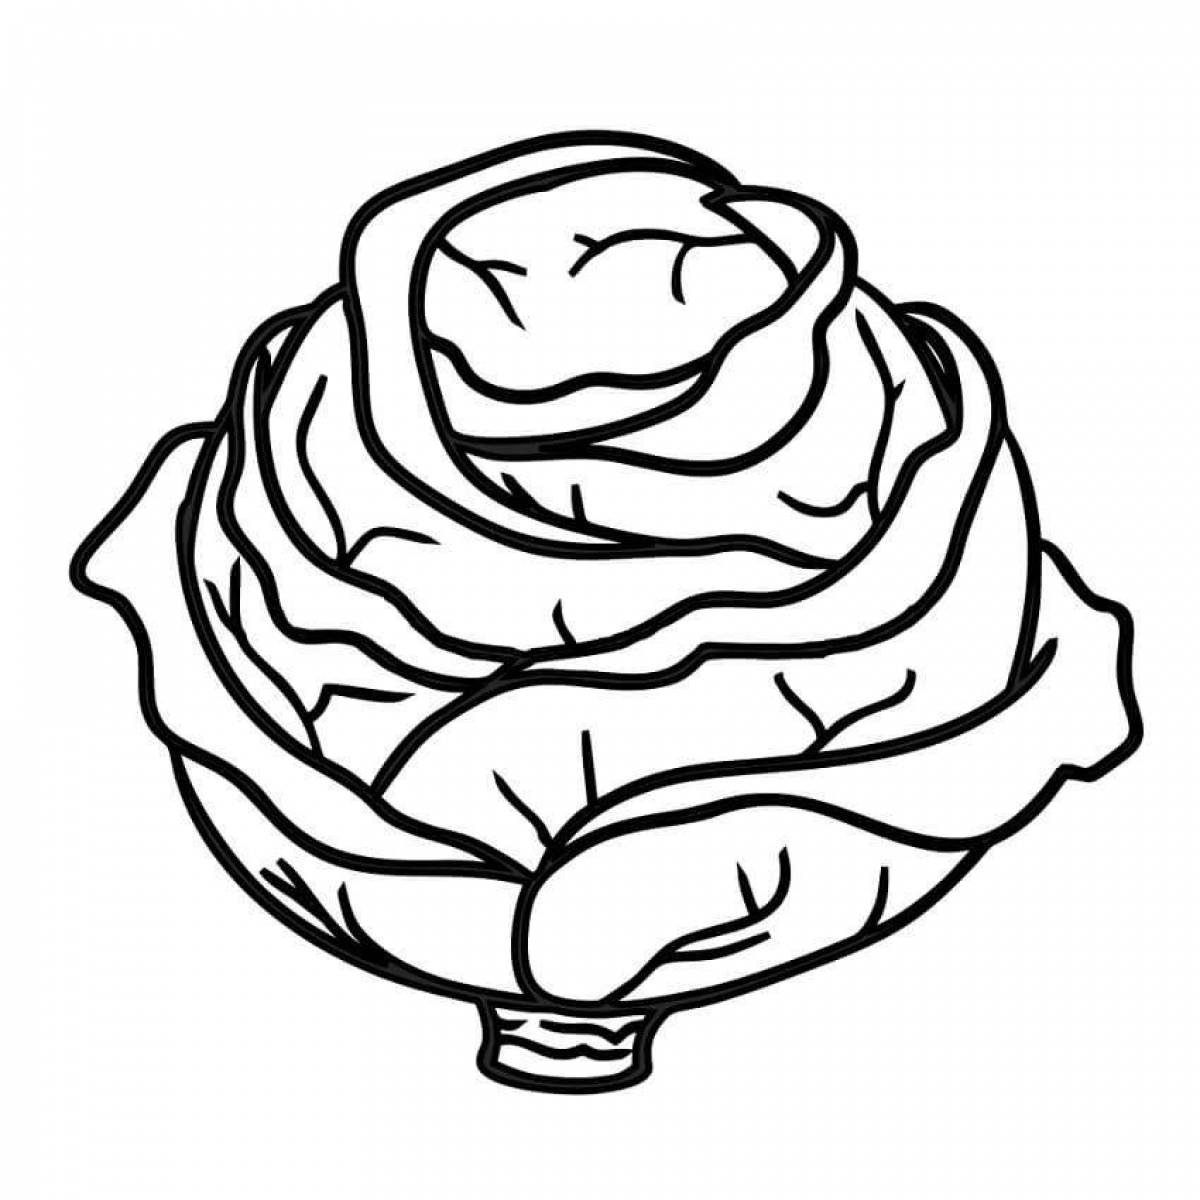 Color-frenzy cabbage coloring page for kids